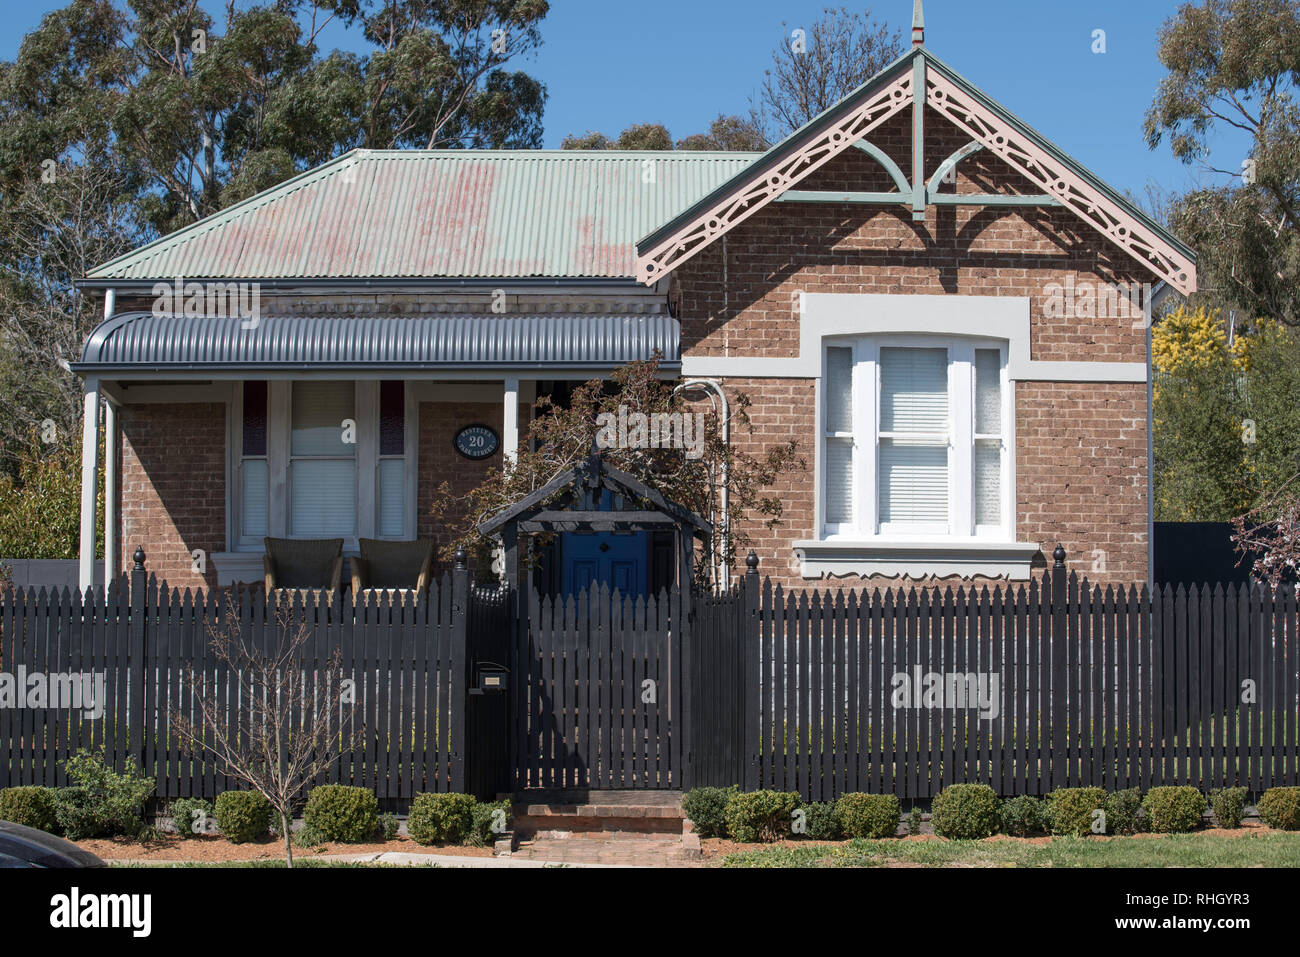 A Federation era brick and steel roofed home with a bull nose front veranda and fret work over the hip roof end in Millthorpe, New South Wales, Aust. Stock Photo